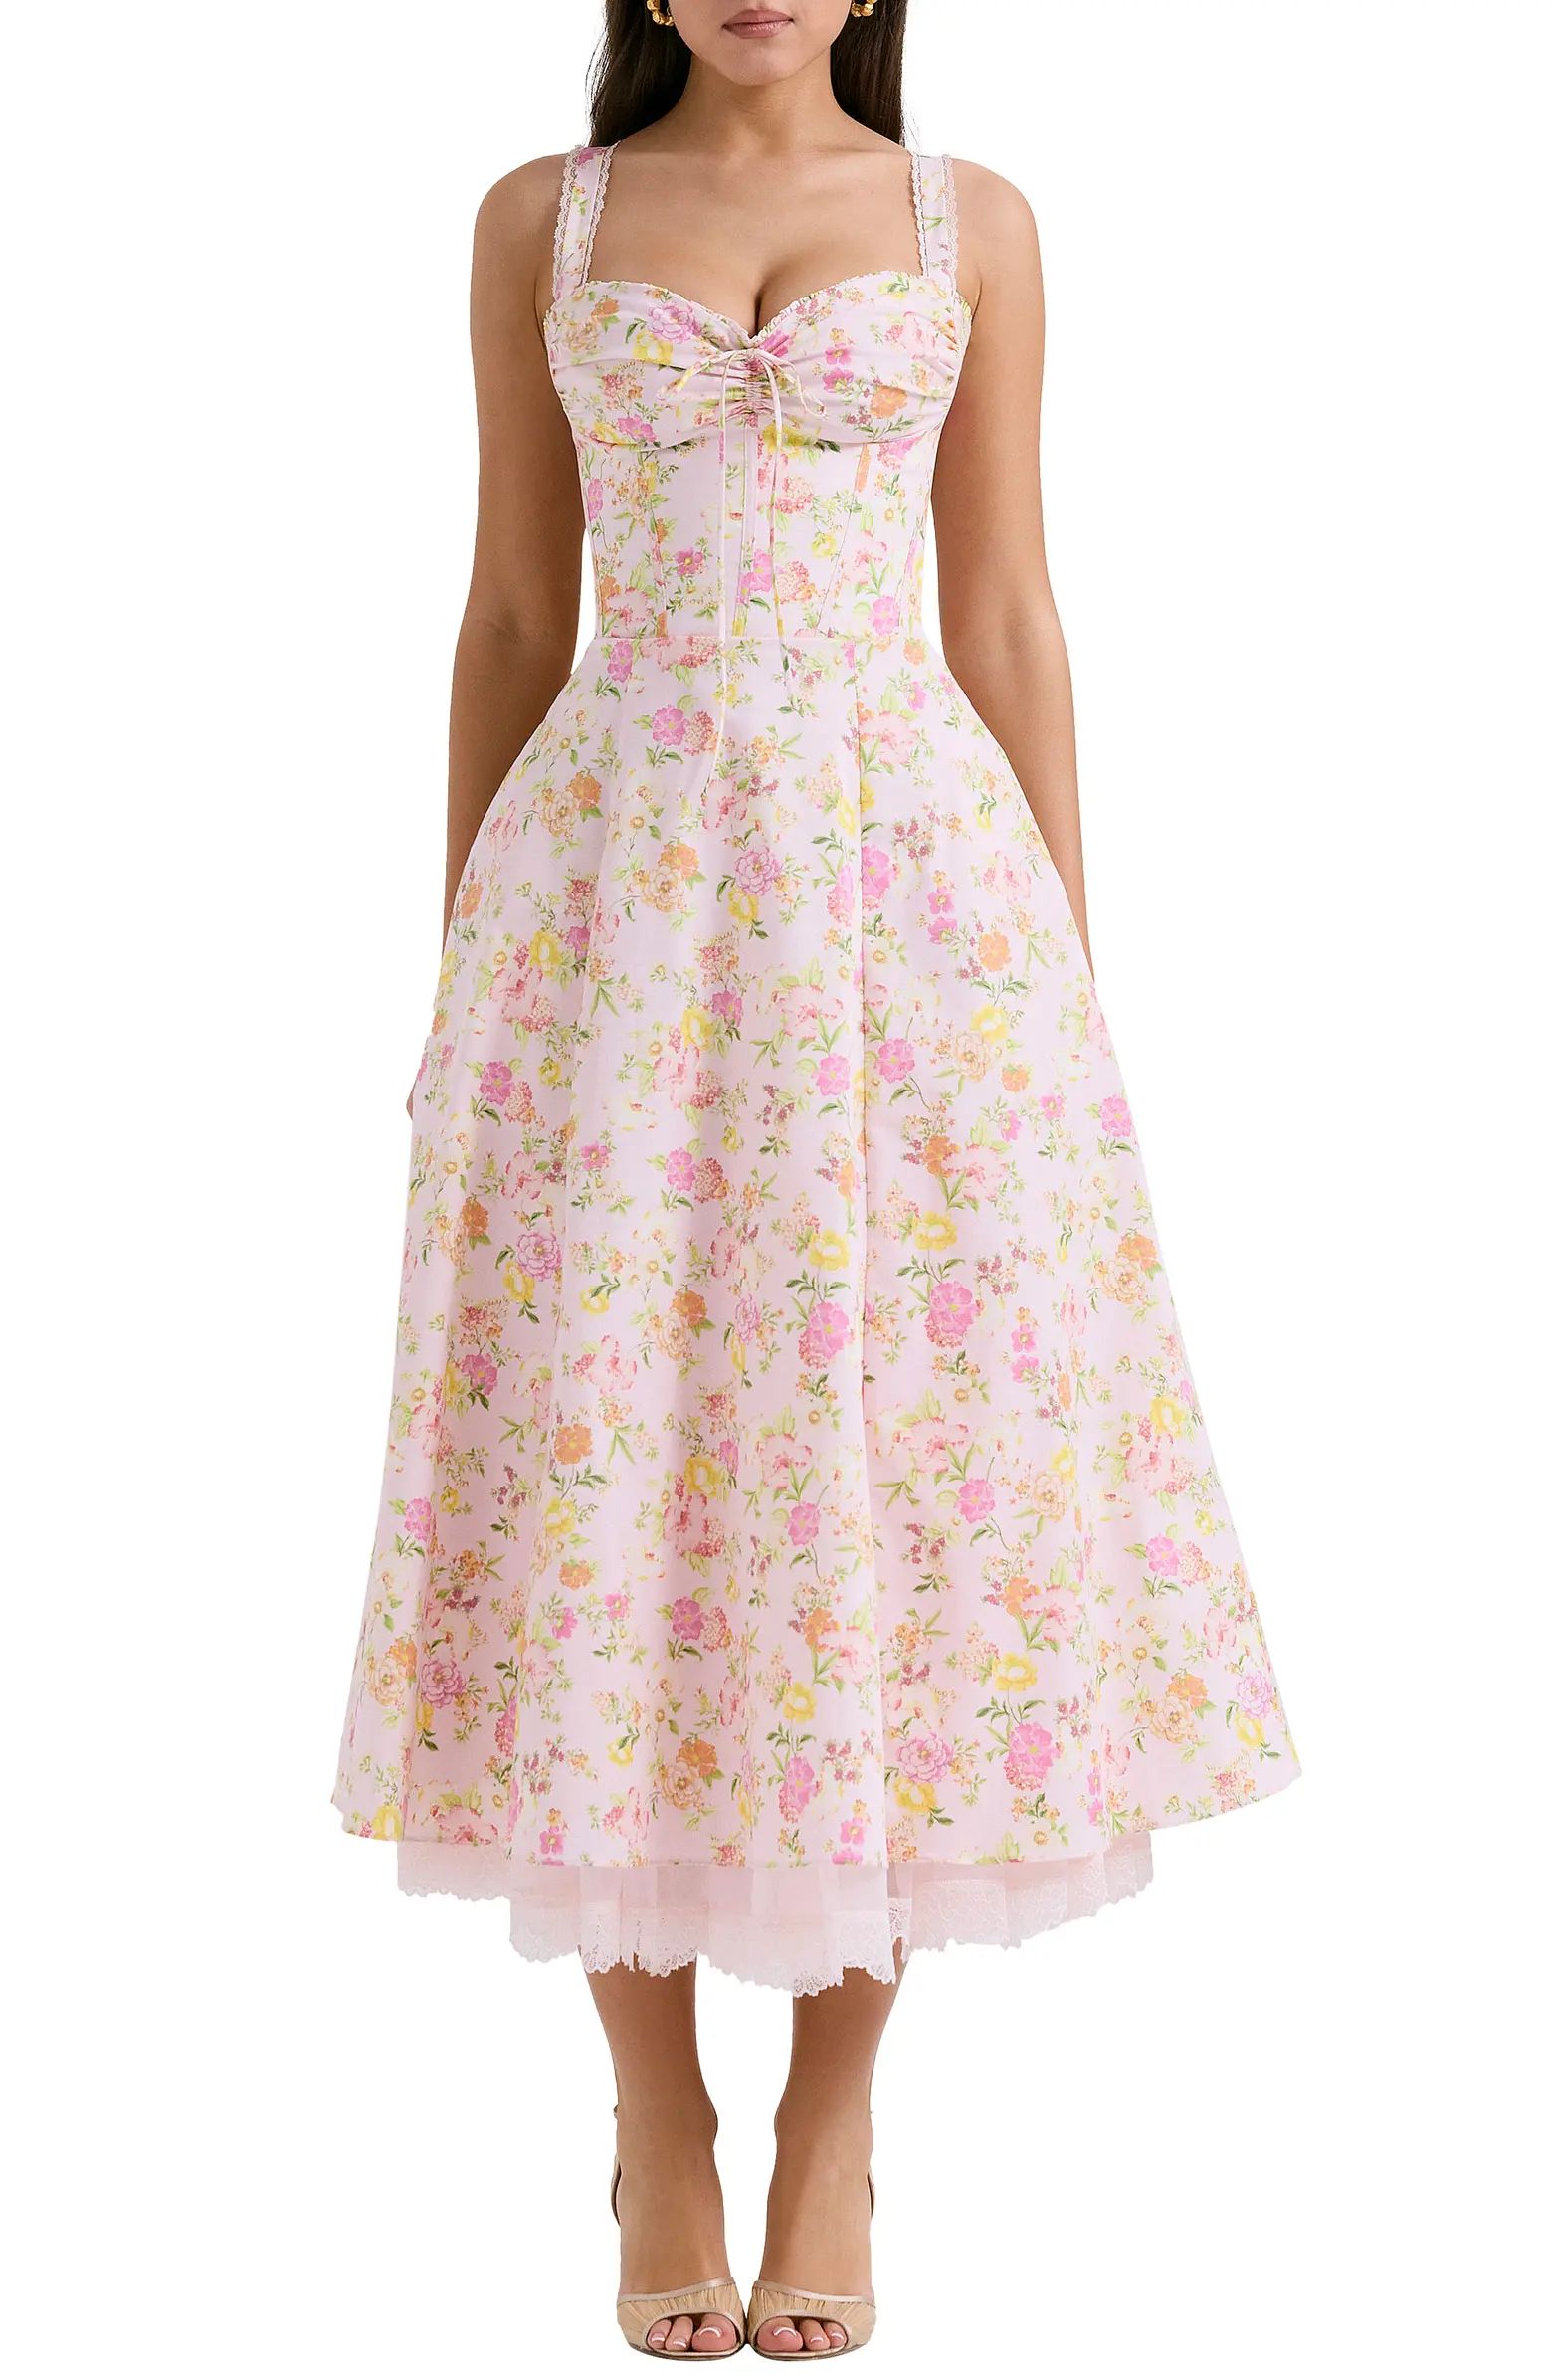 HOUSE OF CB Rosalee Floral Stretch Cotton Petticoat Dress | Nordstrom | Nordstrom